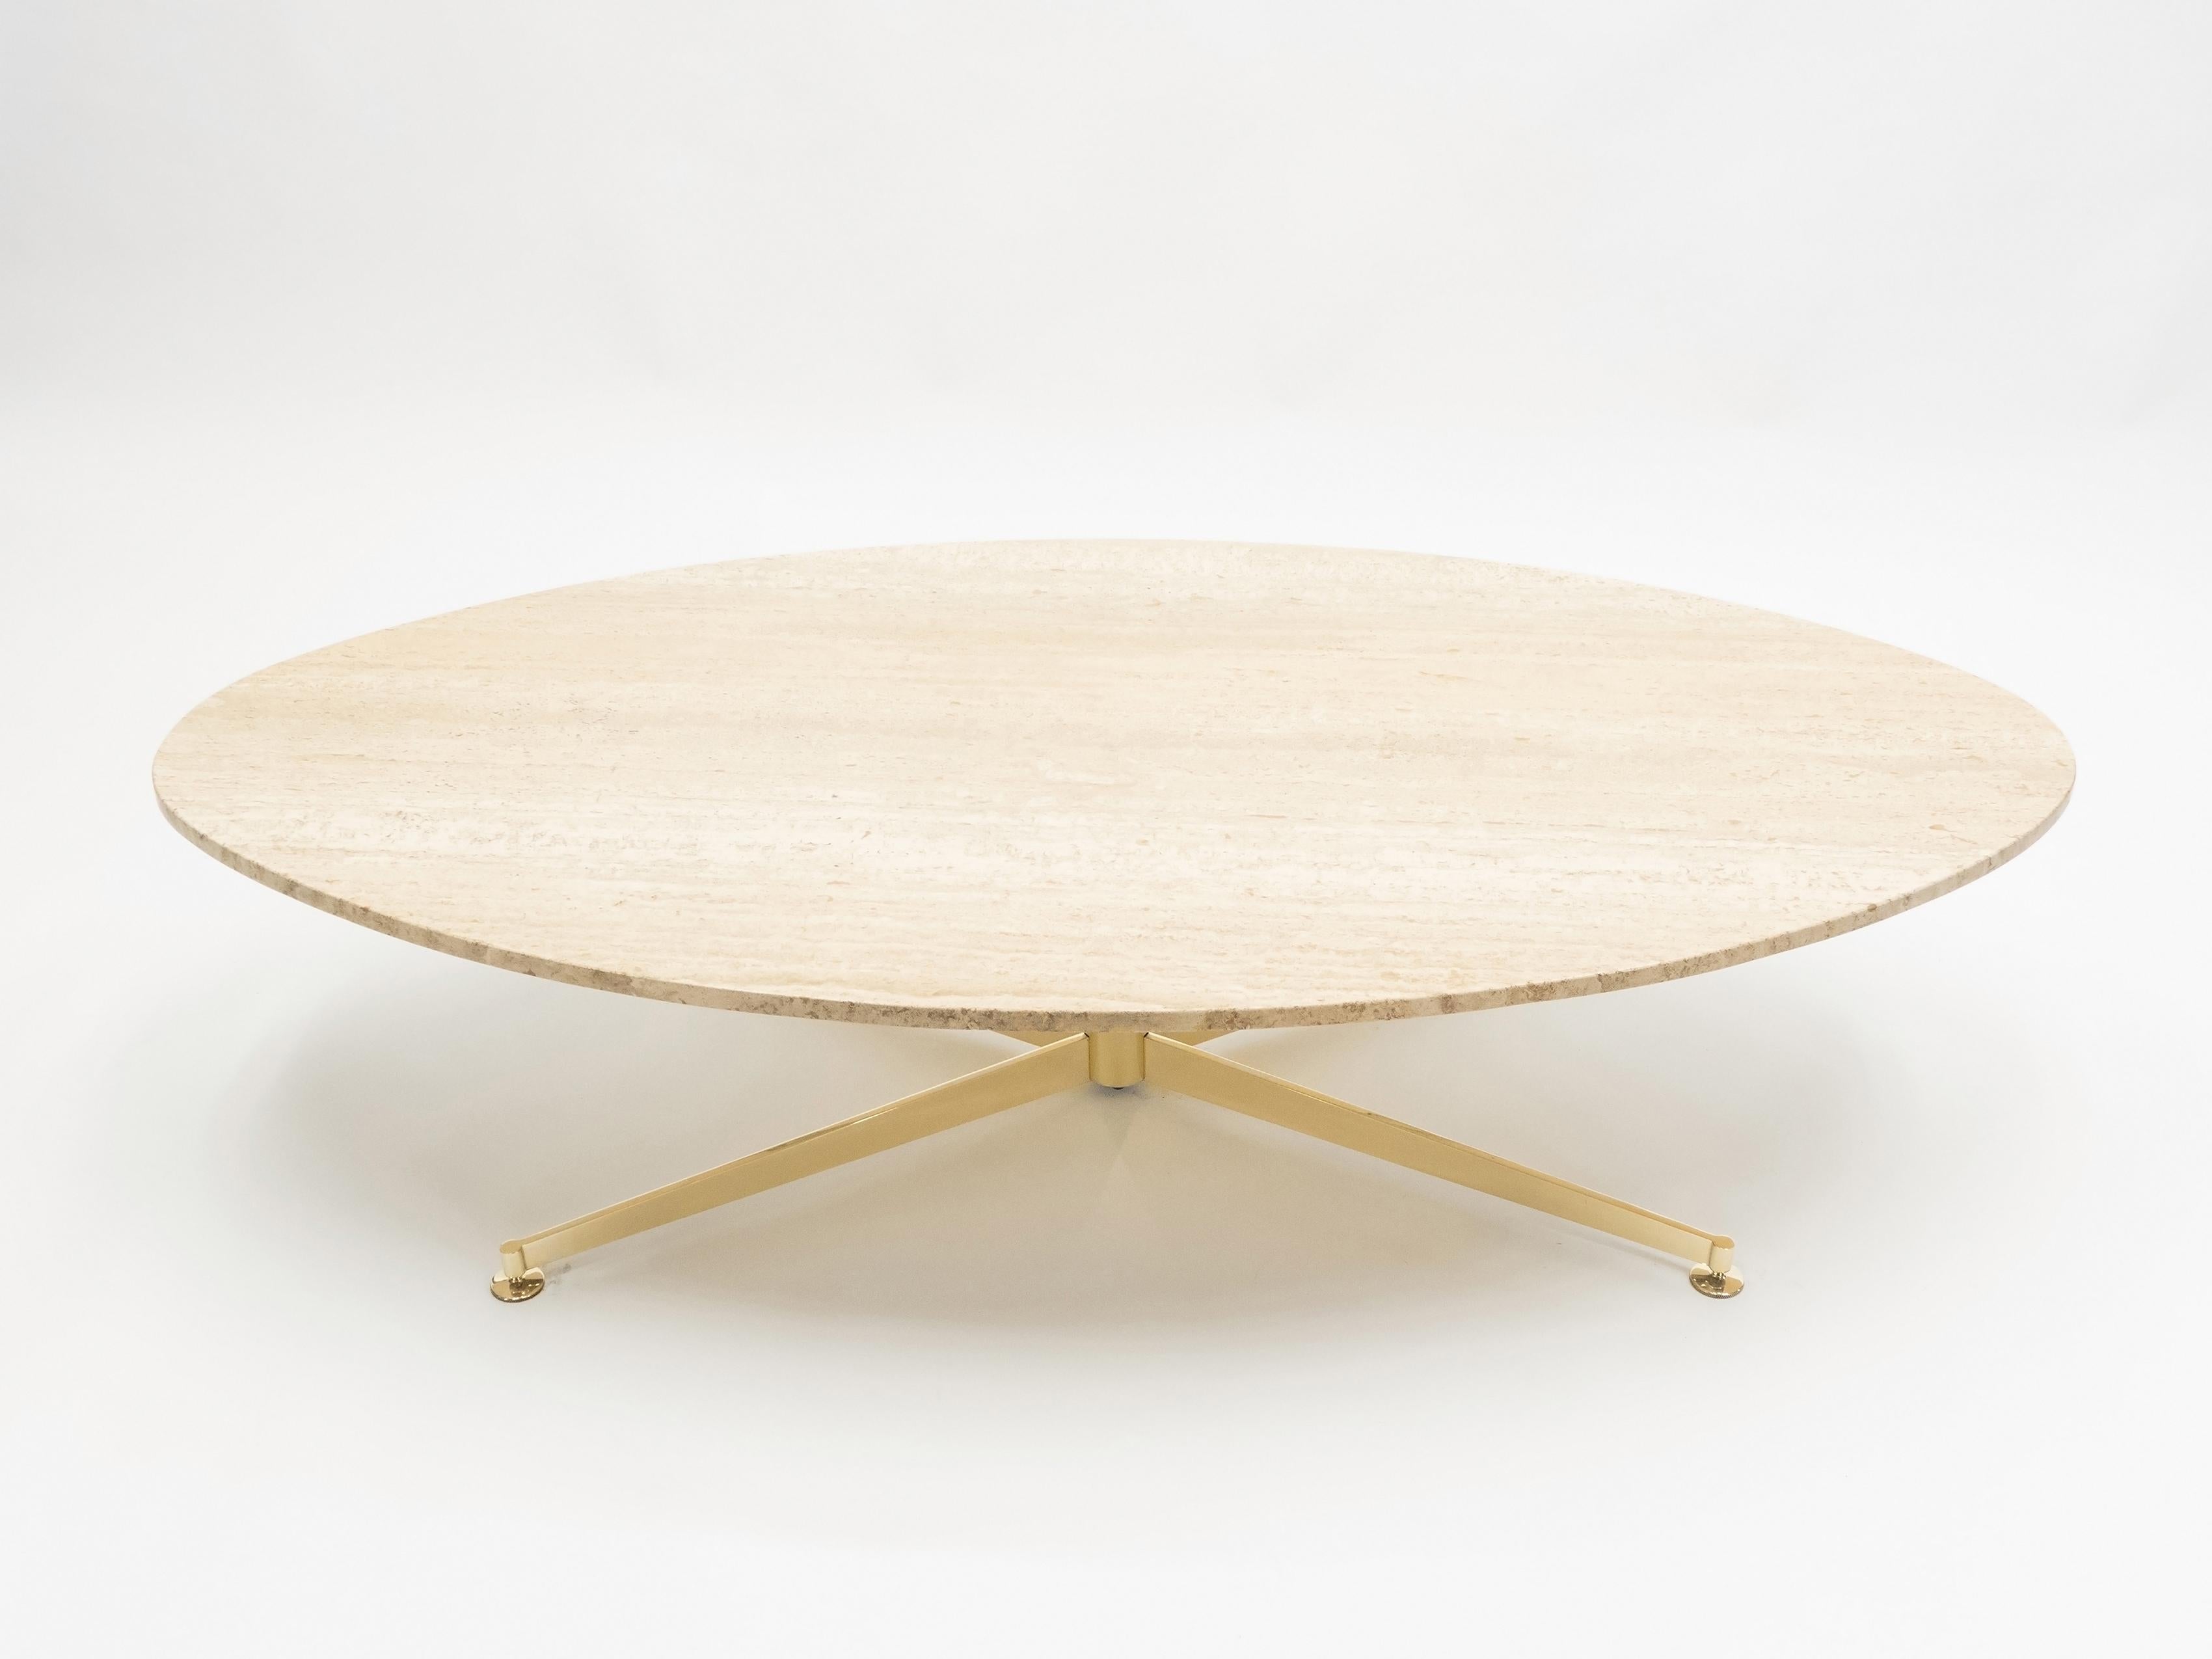 Extremely rare first edition elliptical coffee table by French designer Michel Kin for Arflex, Italy, from the early 1960s. The top is made of Italian travertine with an elliptical shape, supported by a brass pedestal with adjustable foot. The first